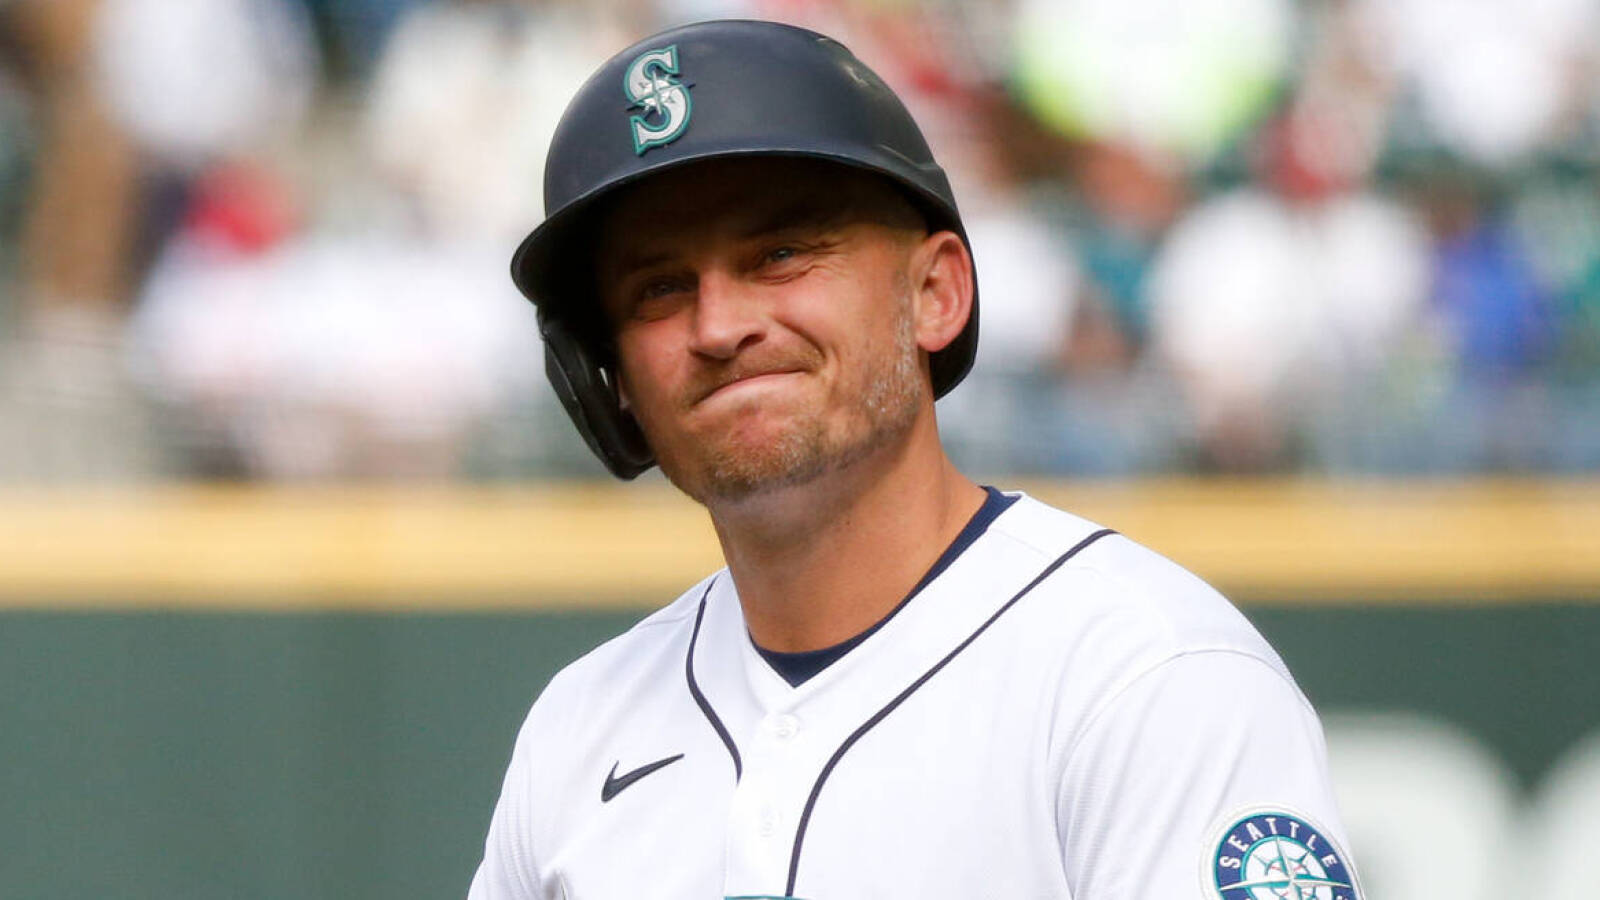 Rangers tried to convince Kyle Seager to come out of retirement